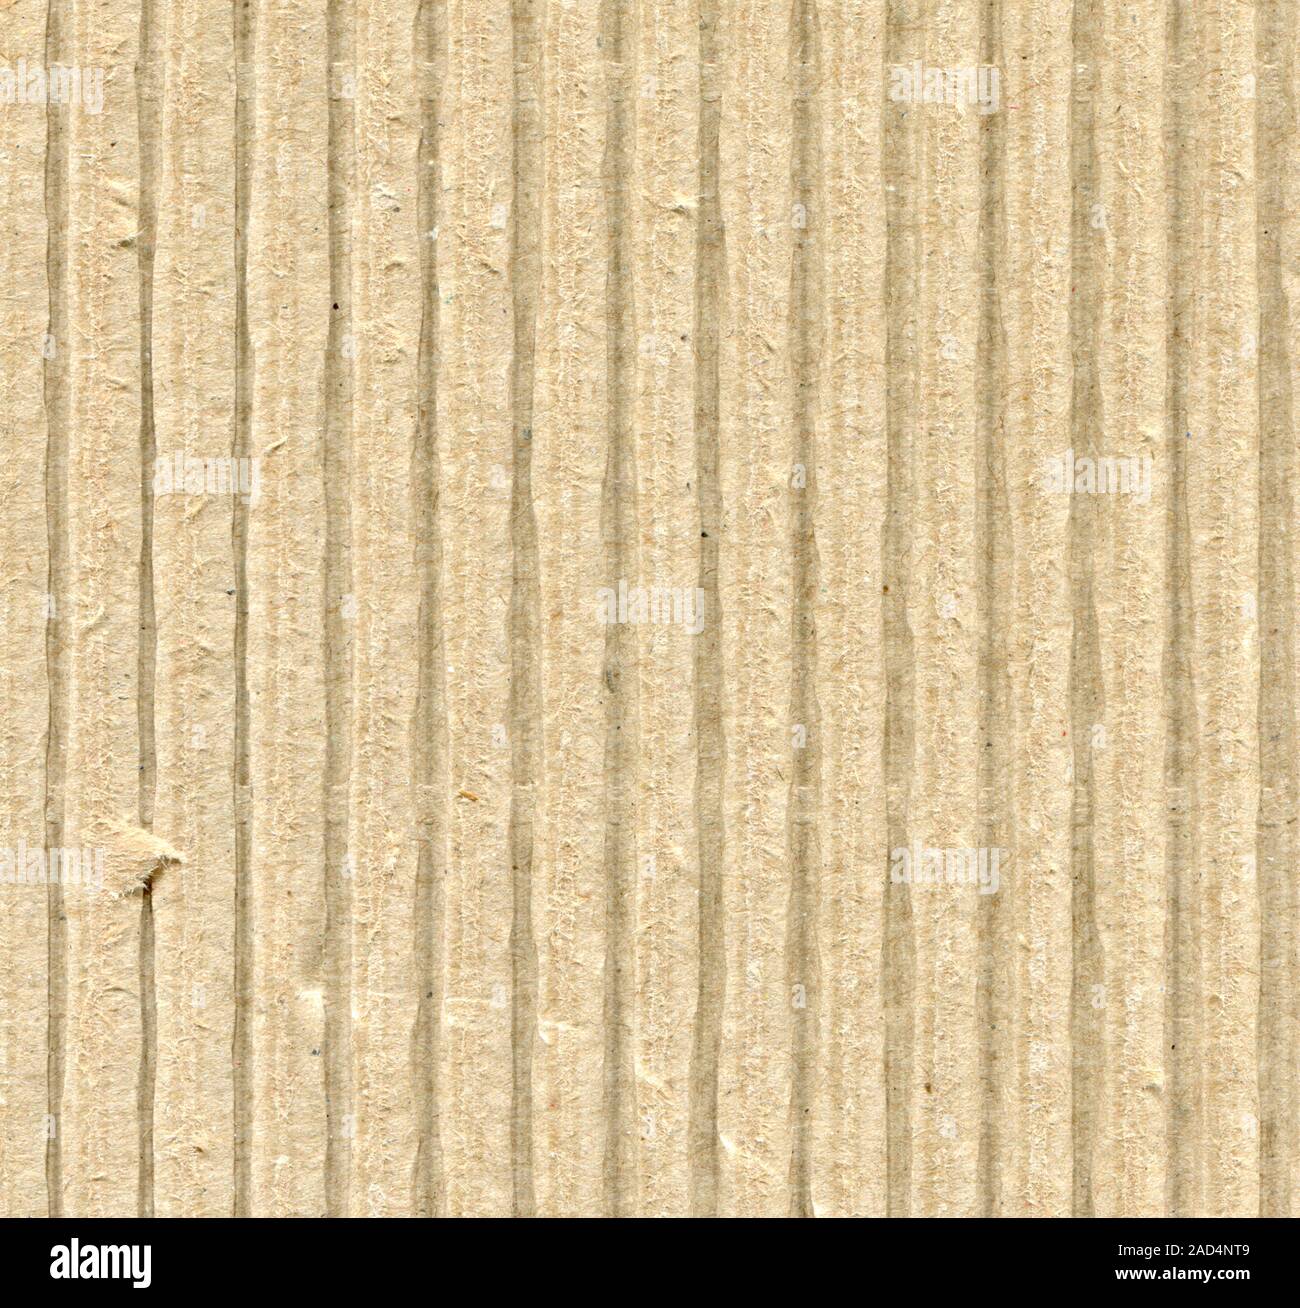 brown corrugated cardboard texture background Stock Photo